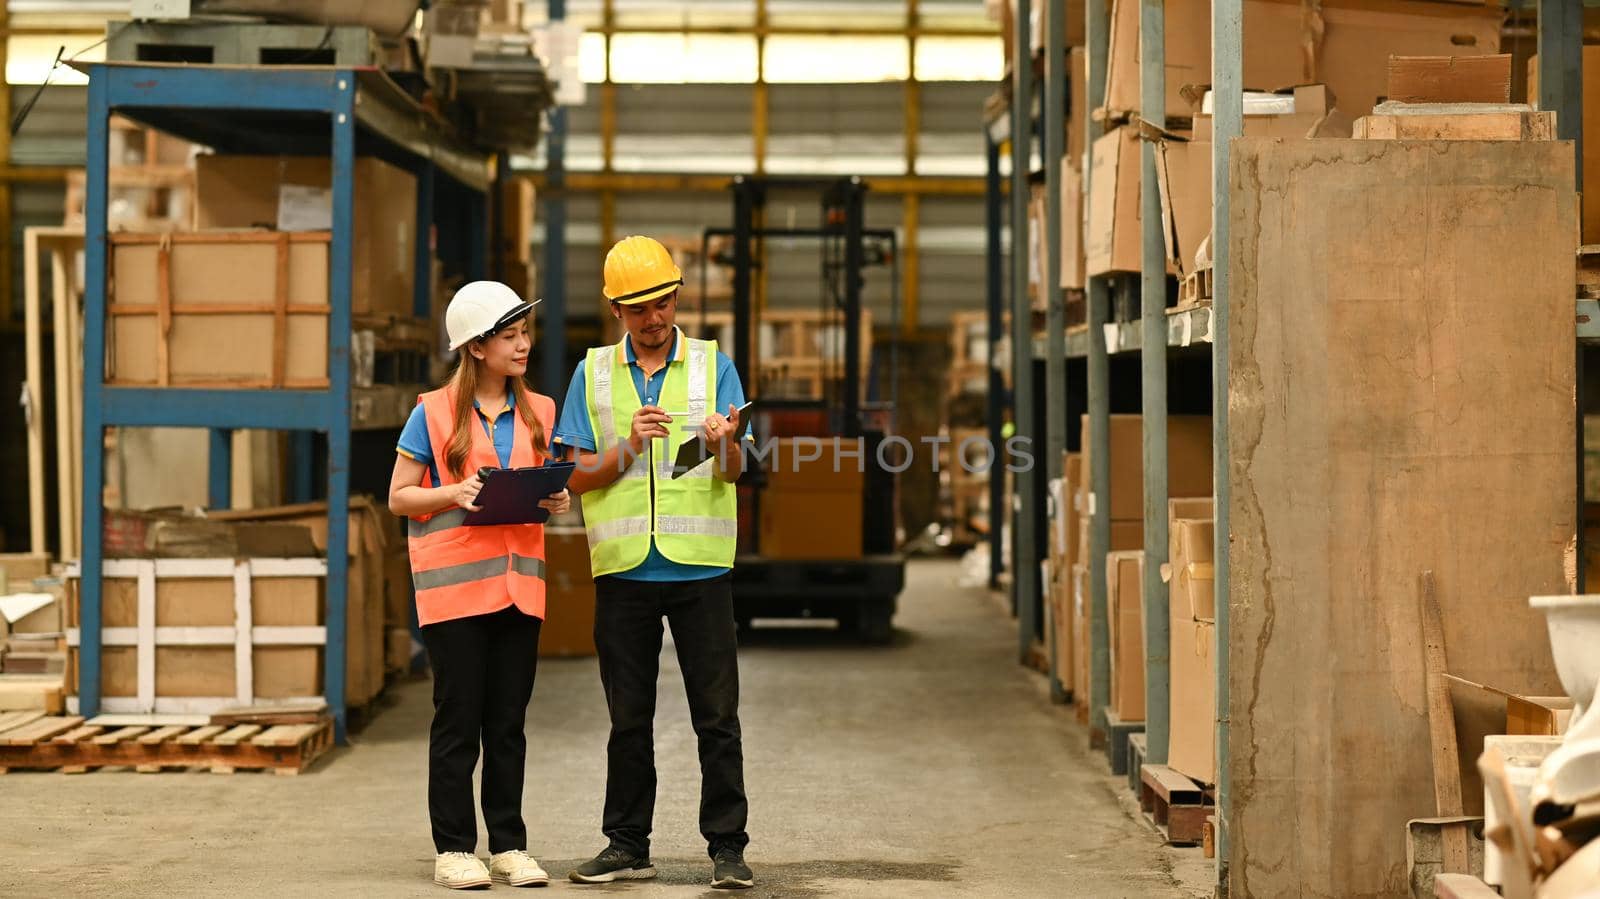 Full length of female managers and worker checking inventory in a warehouse with shelves full of cardboard boxes in the background by prathanchorruangsak